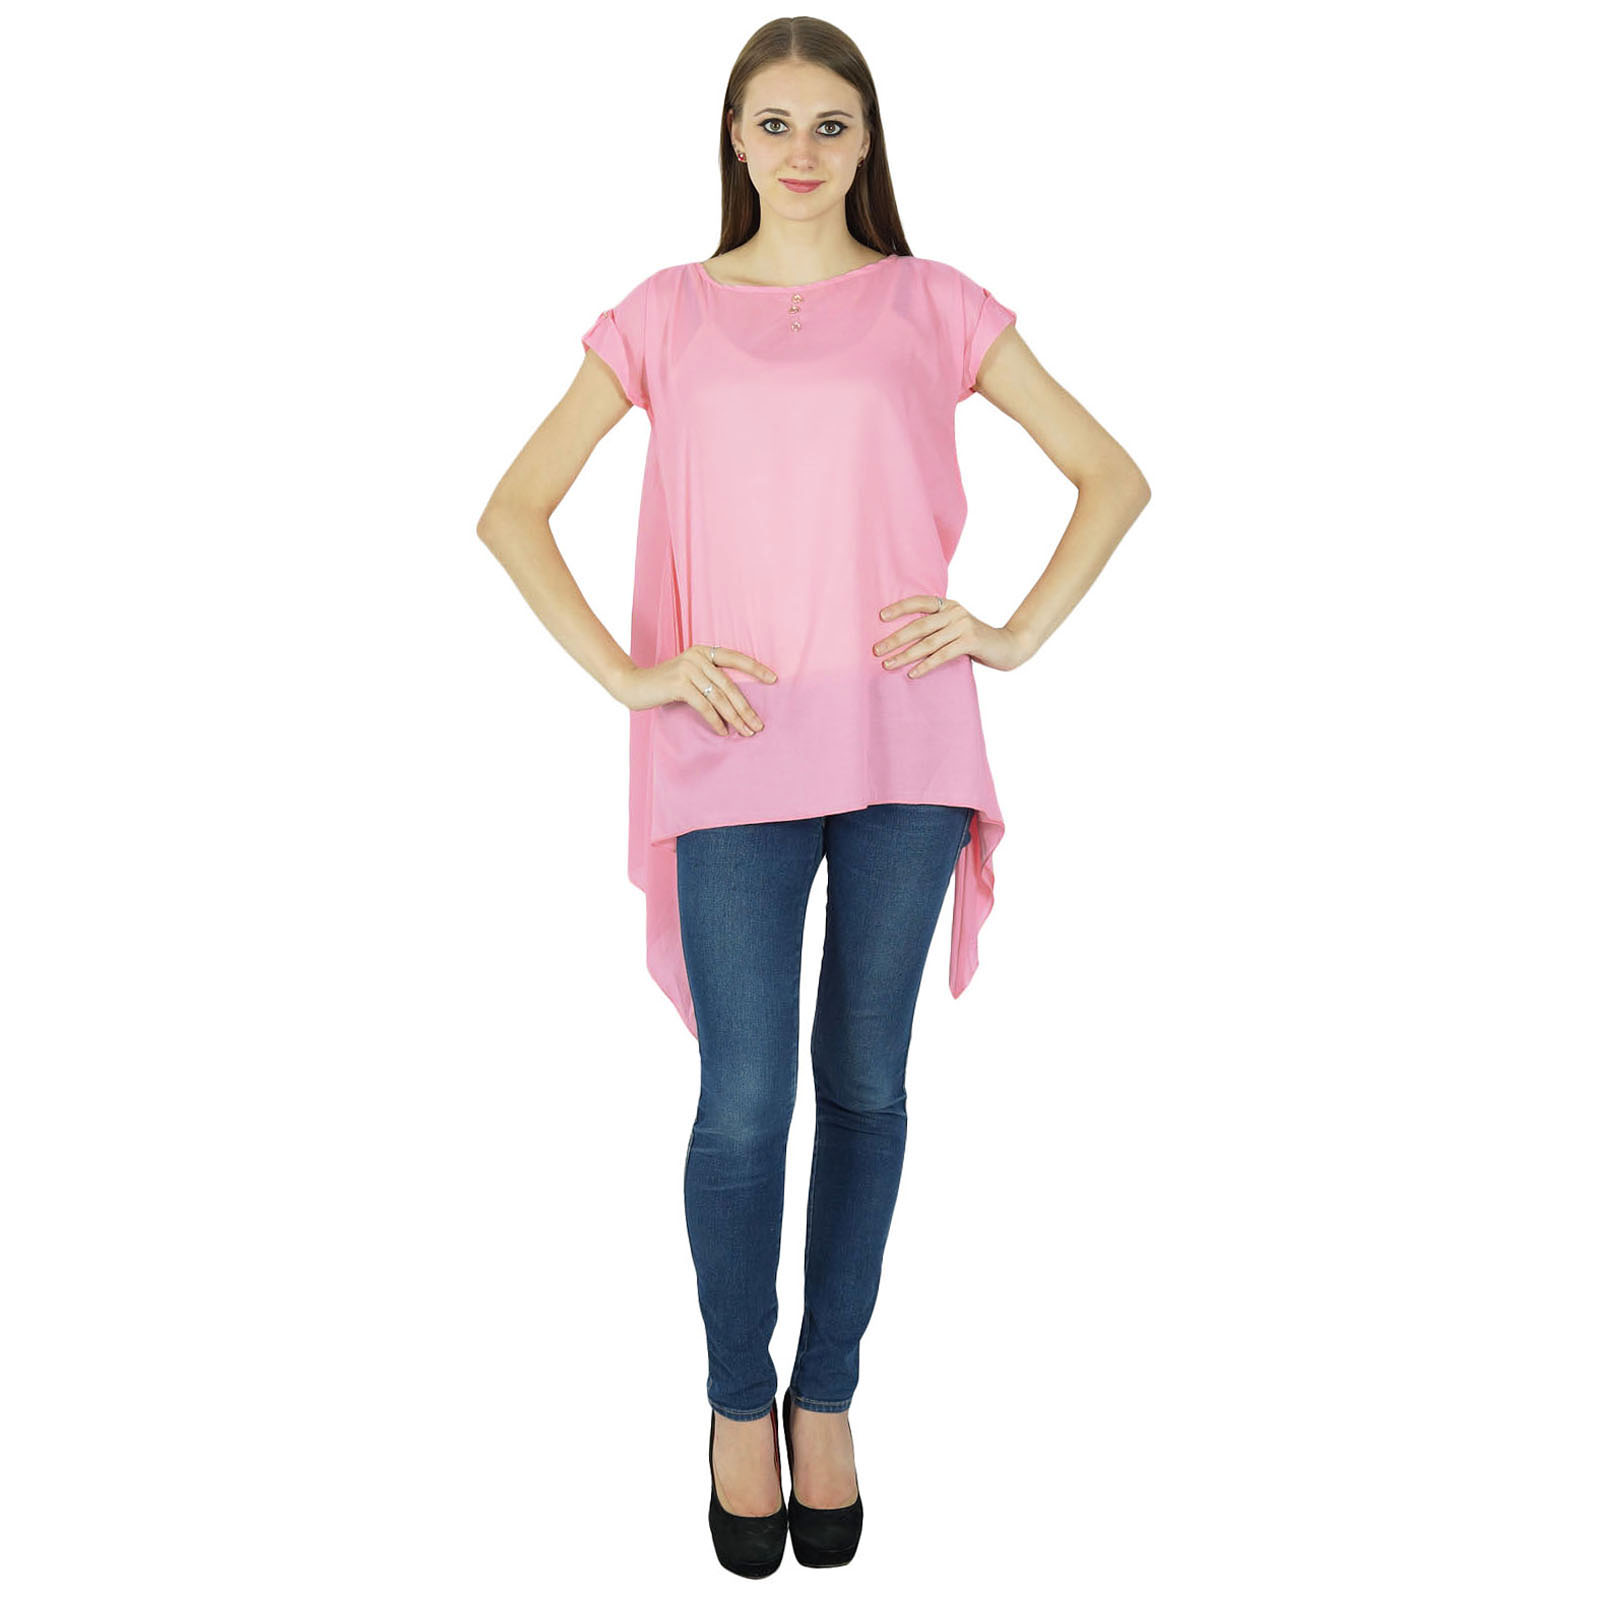 XS-XL Casual Blouse Clothes L6Nv4o@A Girls Short Sleeve Seaside T-Shirts